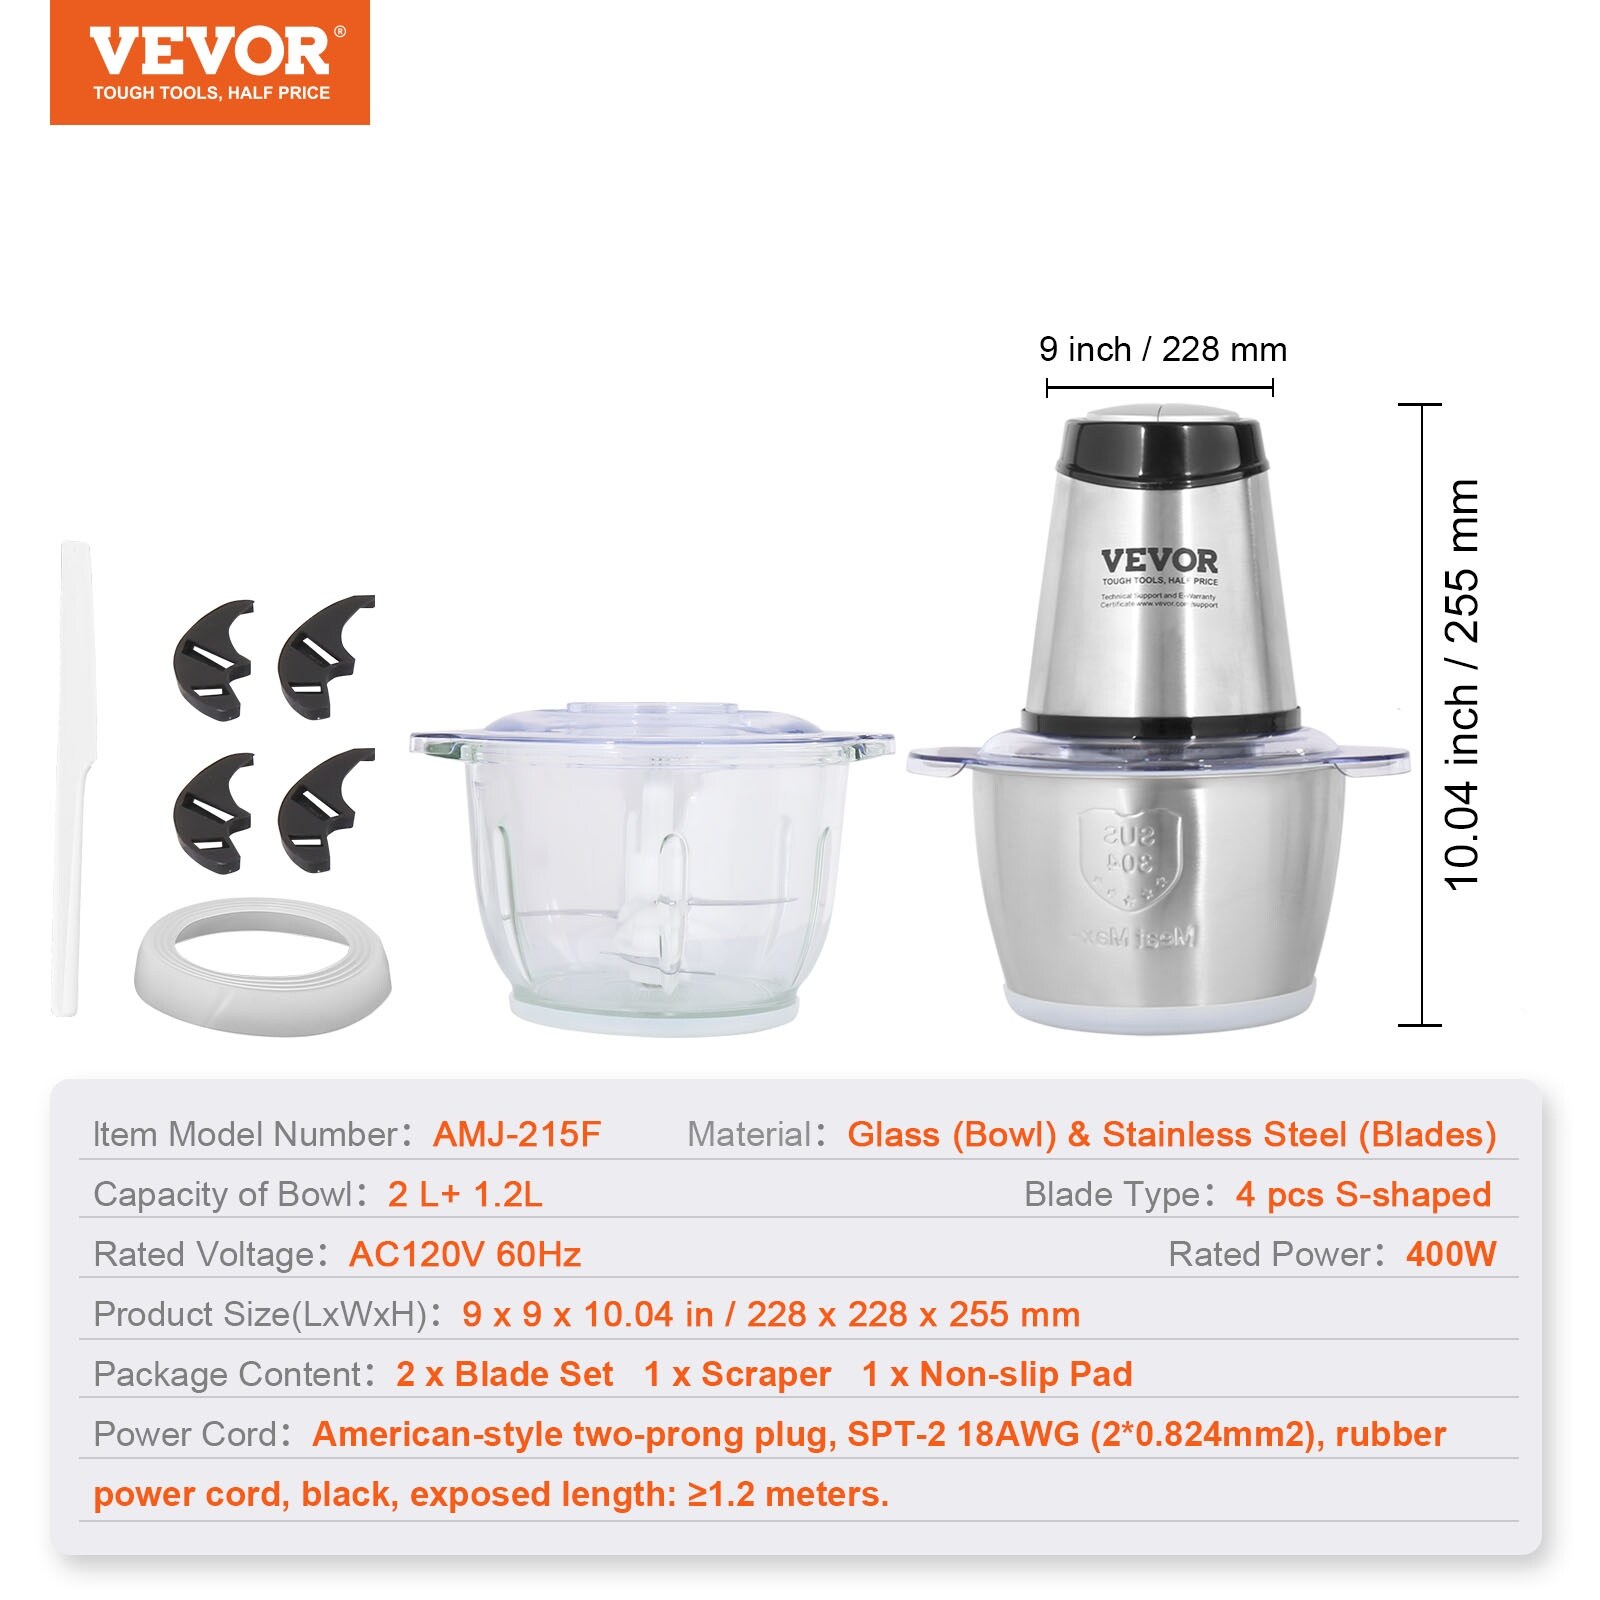 https://ak1.ostkcdn.com/images/products/is/images/direct/1fd4a65853126de26915a9f87ccfe667b2b54d32/VEVOR-Food-Processor-Electric-Meat-Grinder-with-4-Wing-Stainless-Steel-Blades.jpg